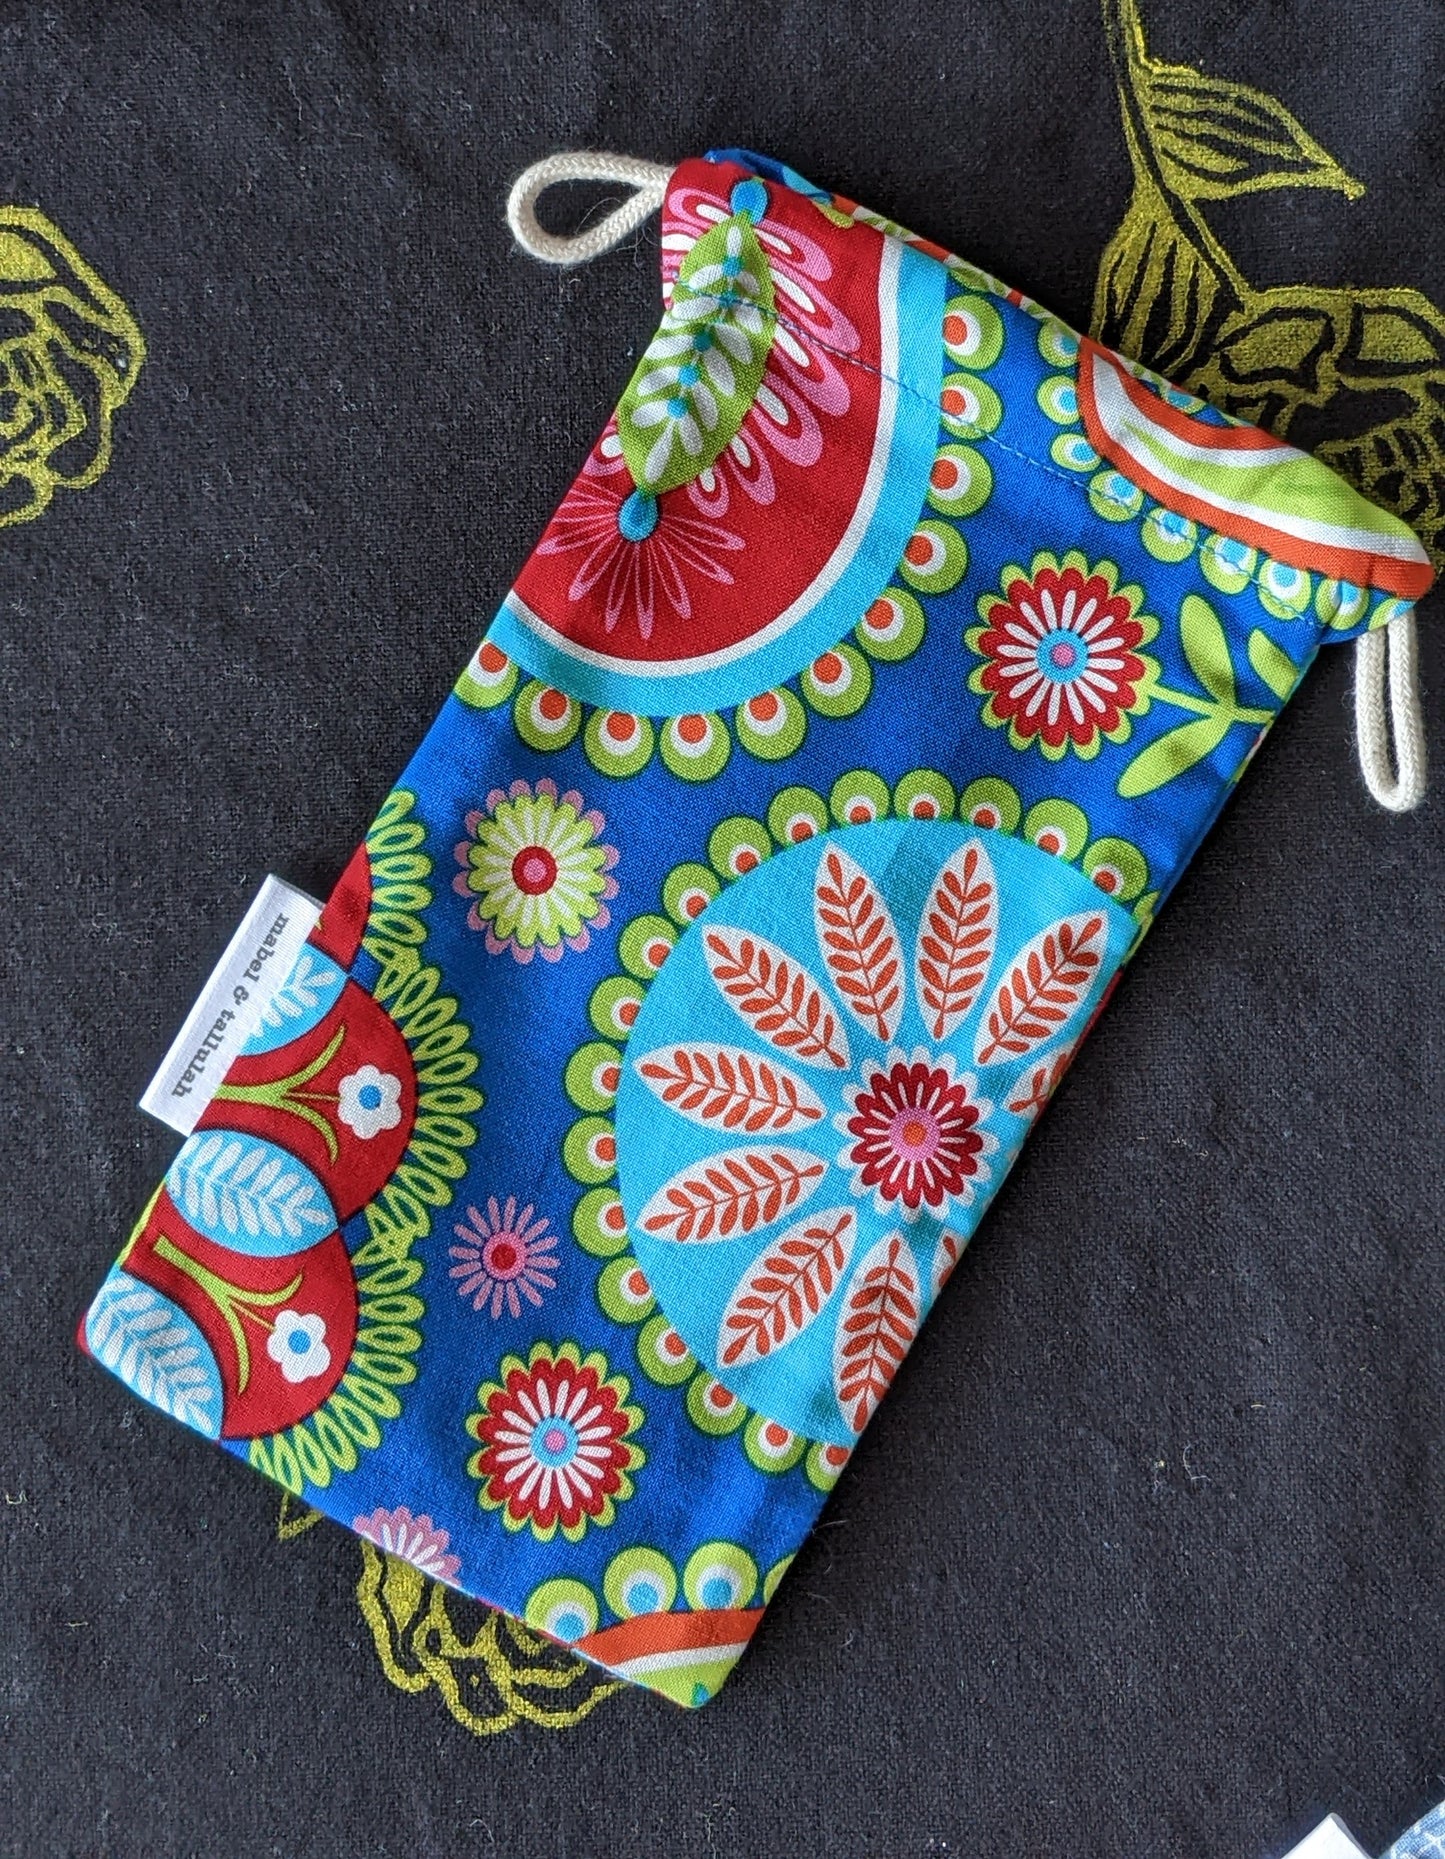 blue red green sunglasses cover mini pouch by The Arthly Box